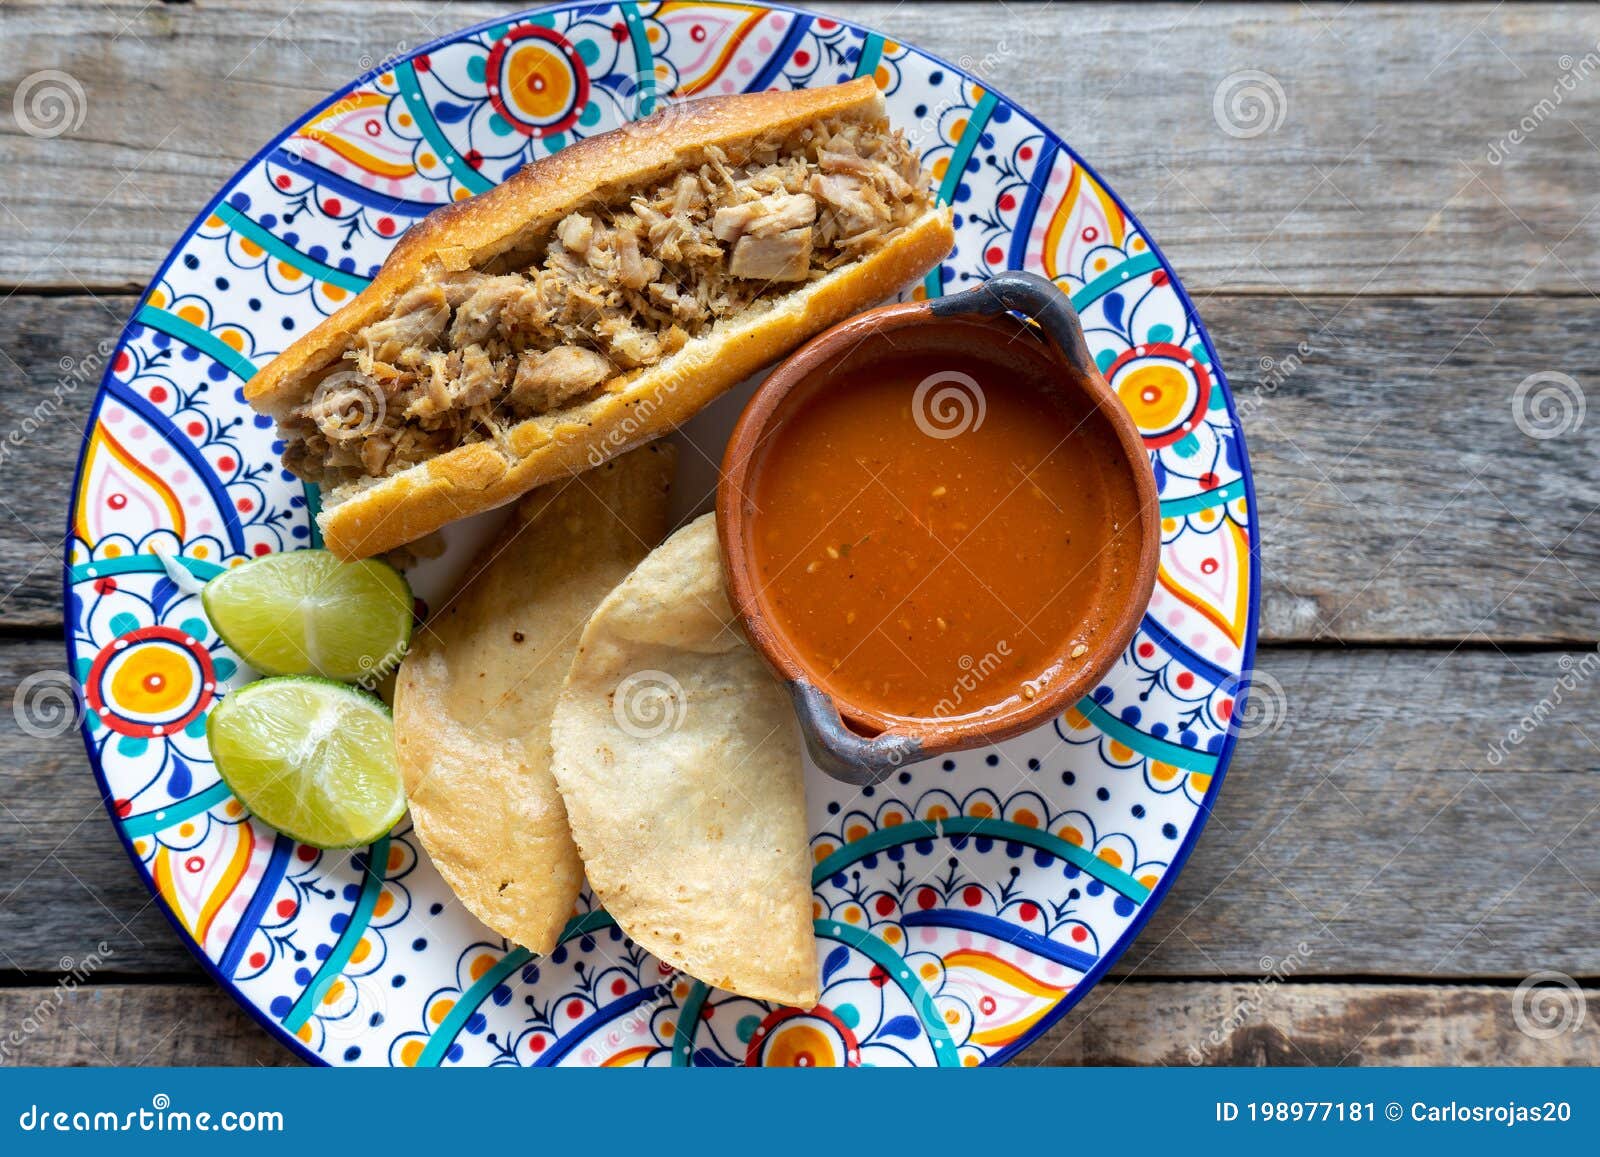 mexican pork sandwich with red sauce also called torta ahogada